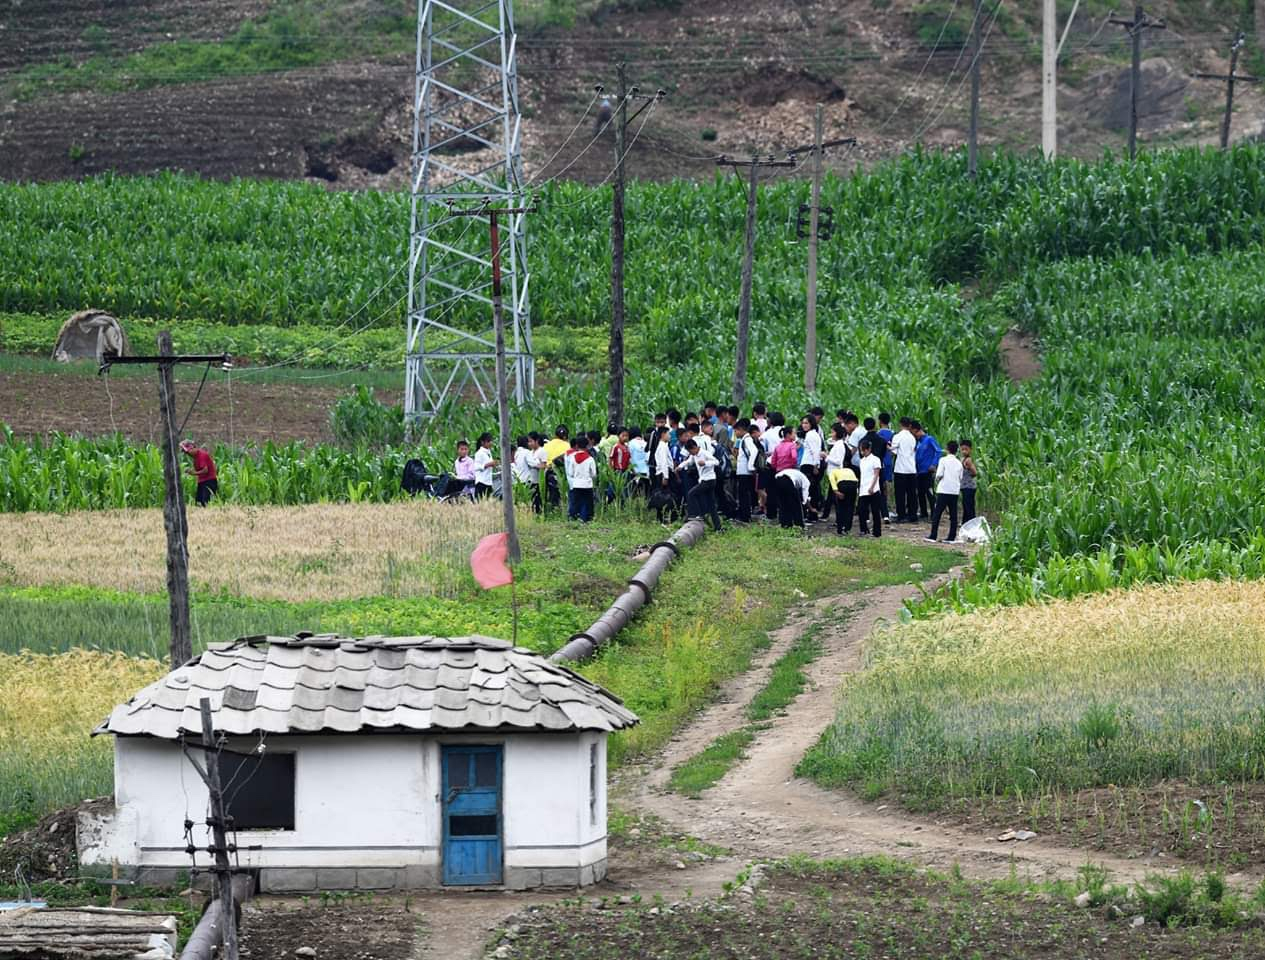 A photo taken by Ju Chan-yang's contact in North Korea shows a gathering in a rural village in Hamgyong Province, North Korea. (Ju Chan-yang)